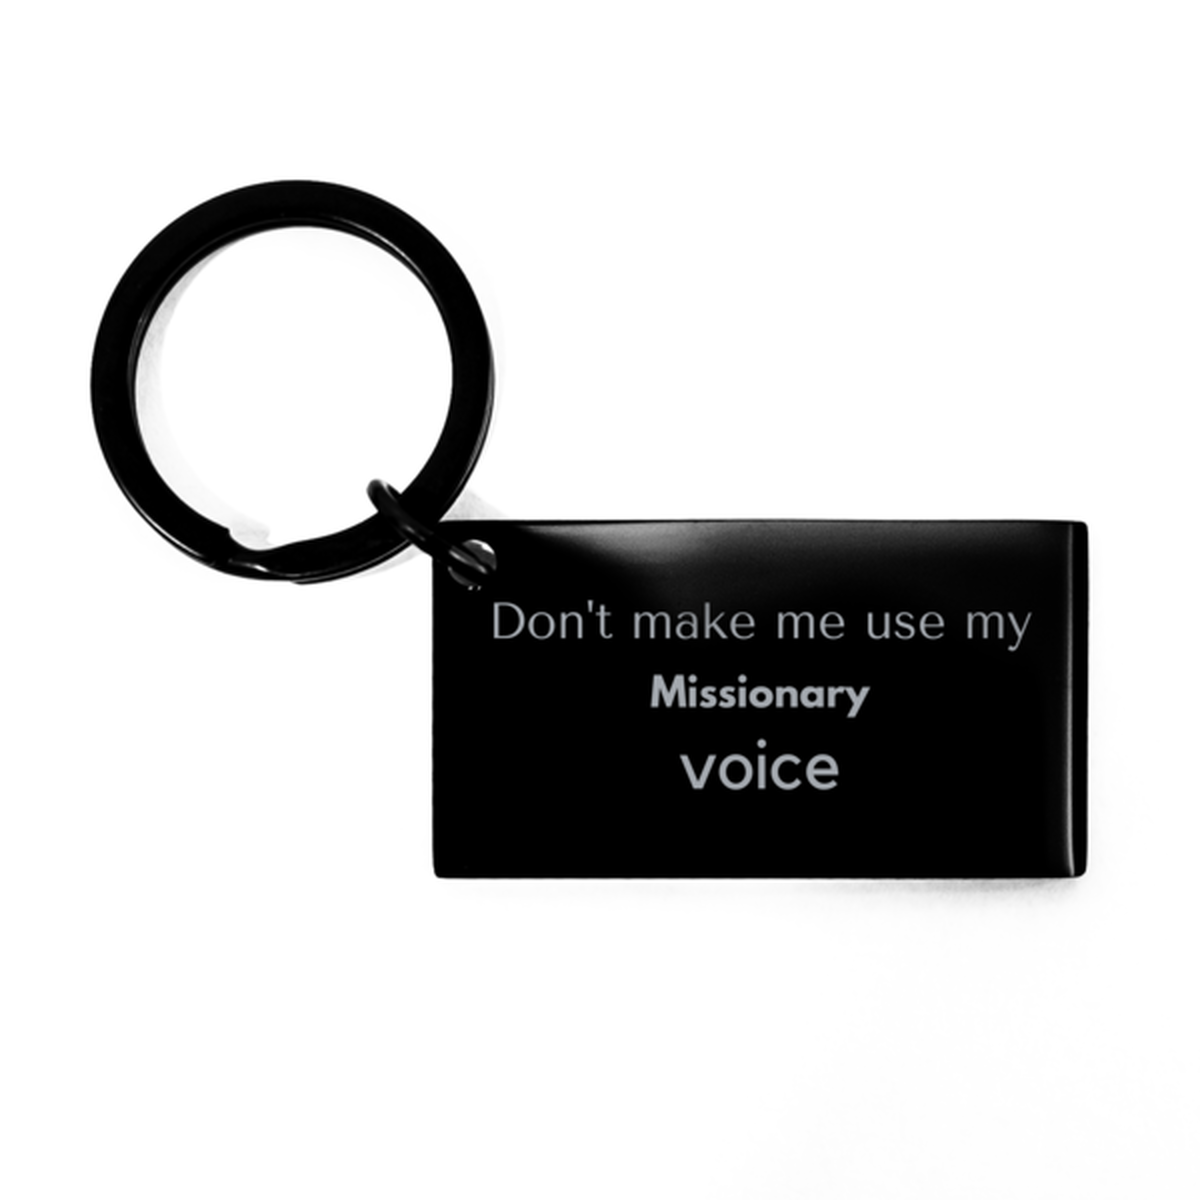 Don't make me use my Missionary voice, Sarcasm Missionary Gifts, Christmas Missionary Keychain Birthday Unique Gifts For Missionary Coworkers, Men, Women, Colleague, Friends